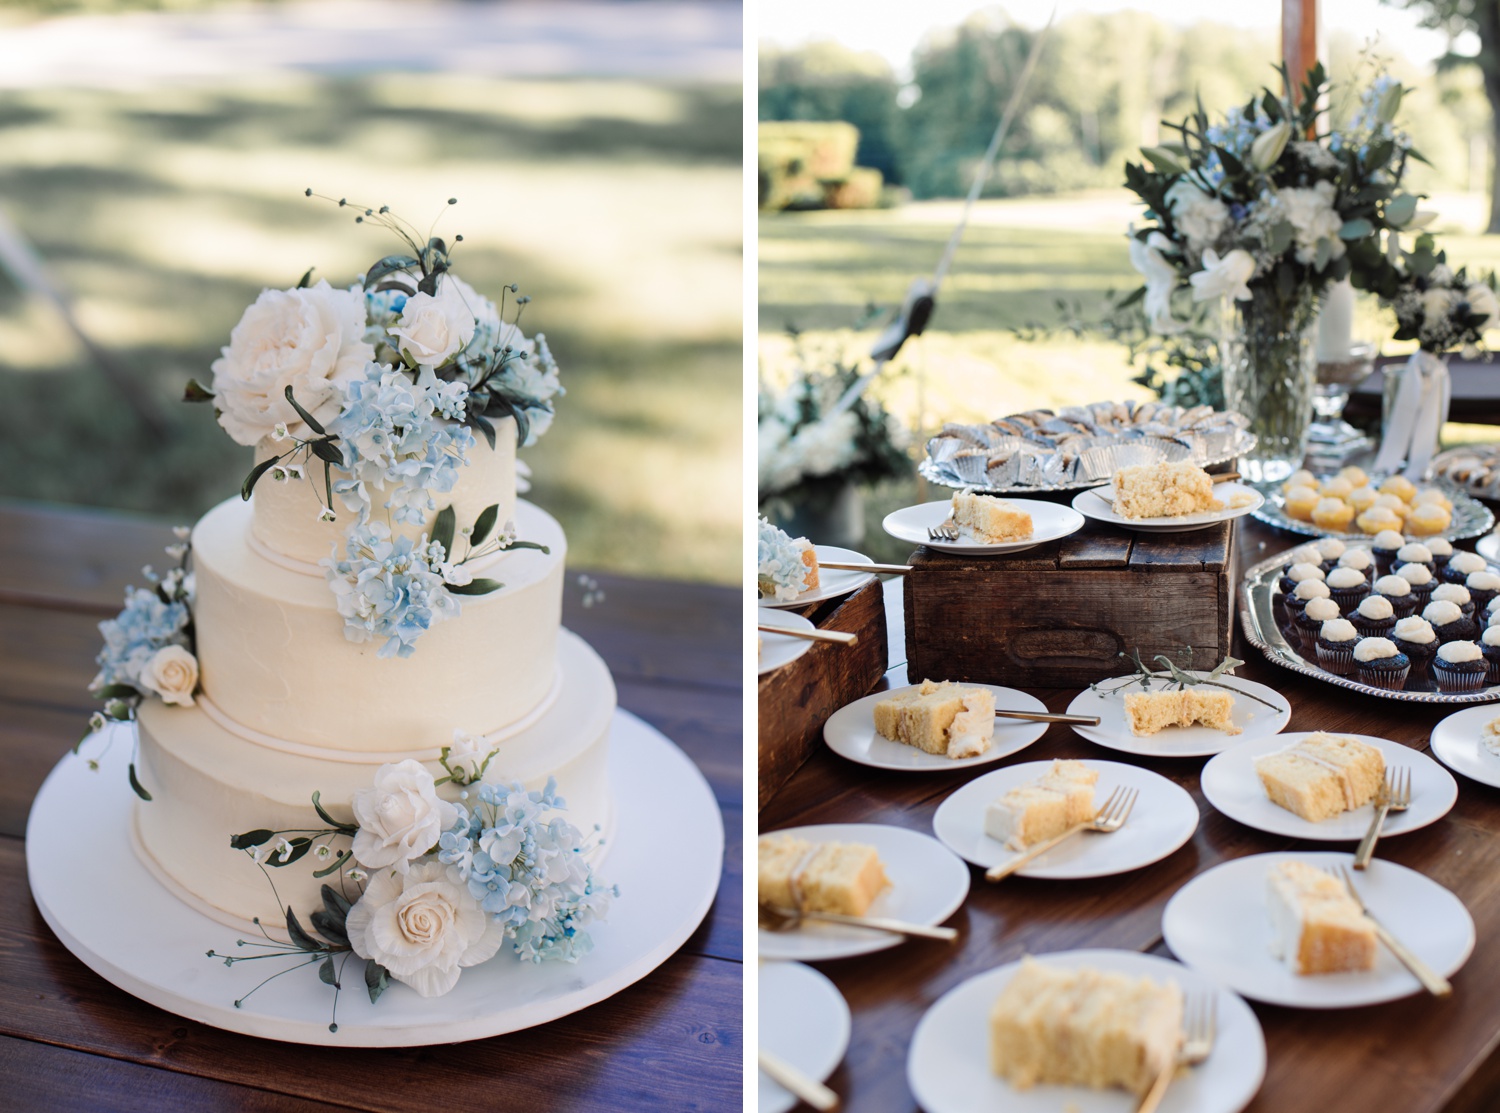 Summer wedding cake covered in white roses and blue hydrangeas